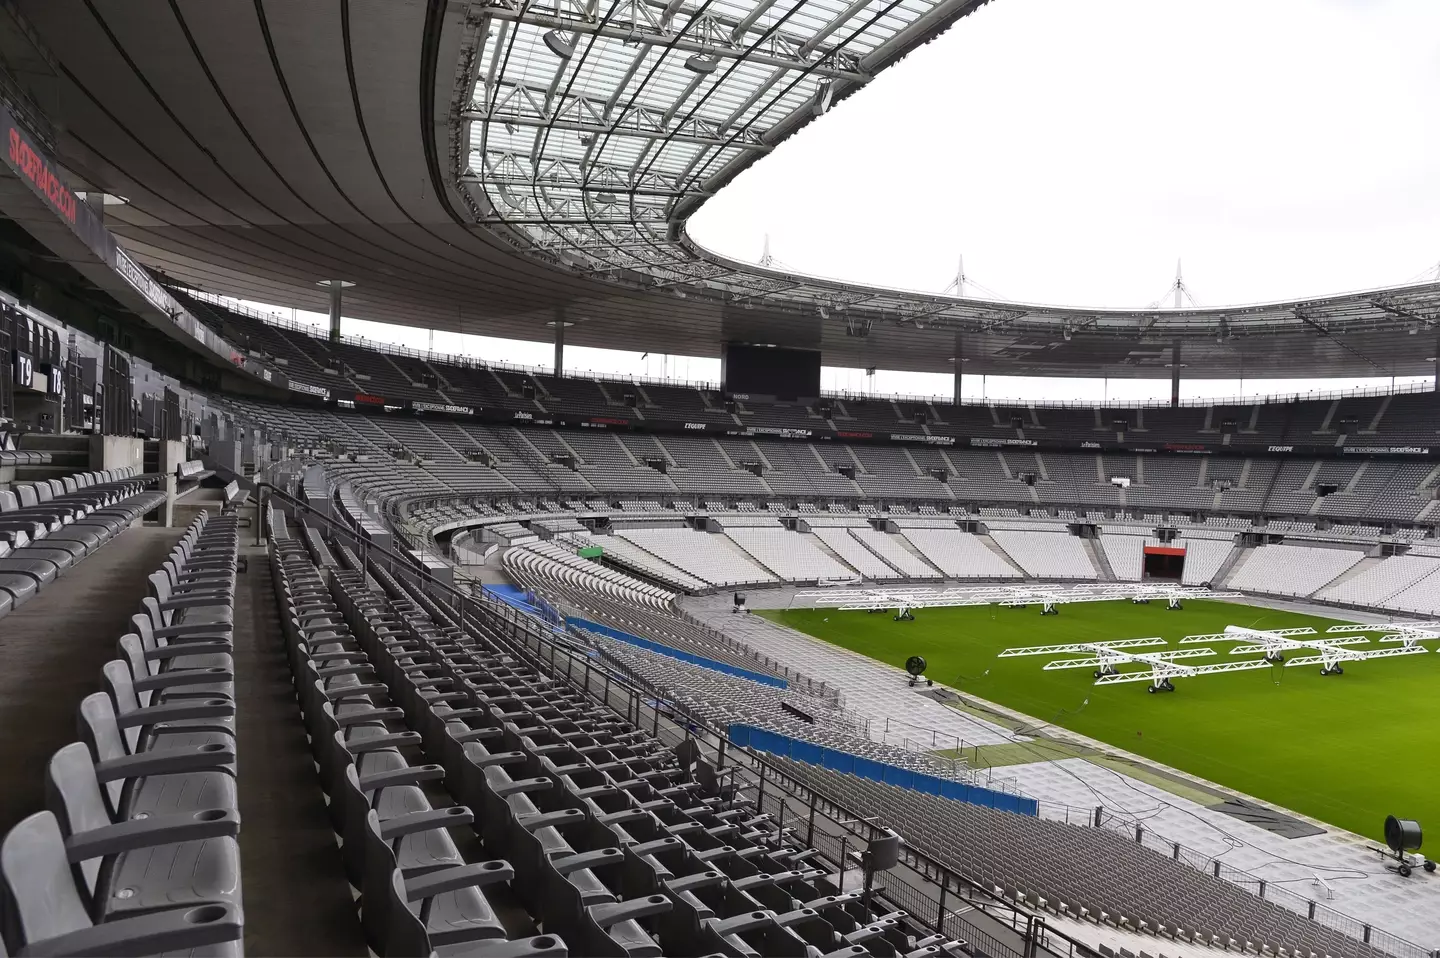 The Stade de France in Paris will host this season's Champions League final (Image: PA)